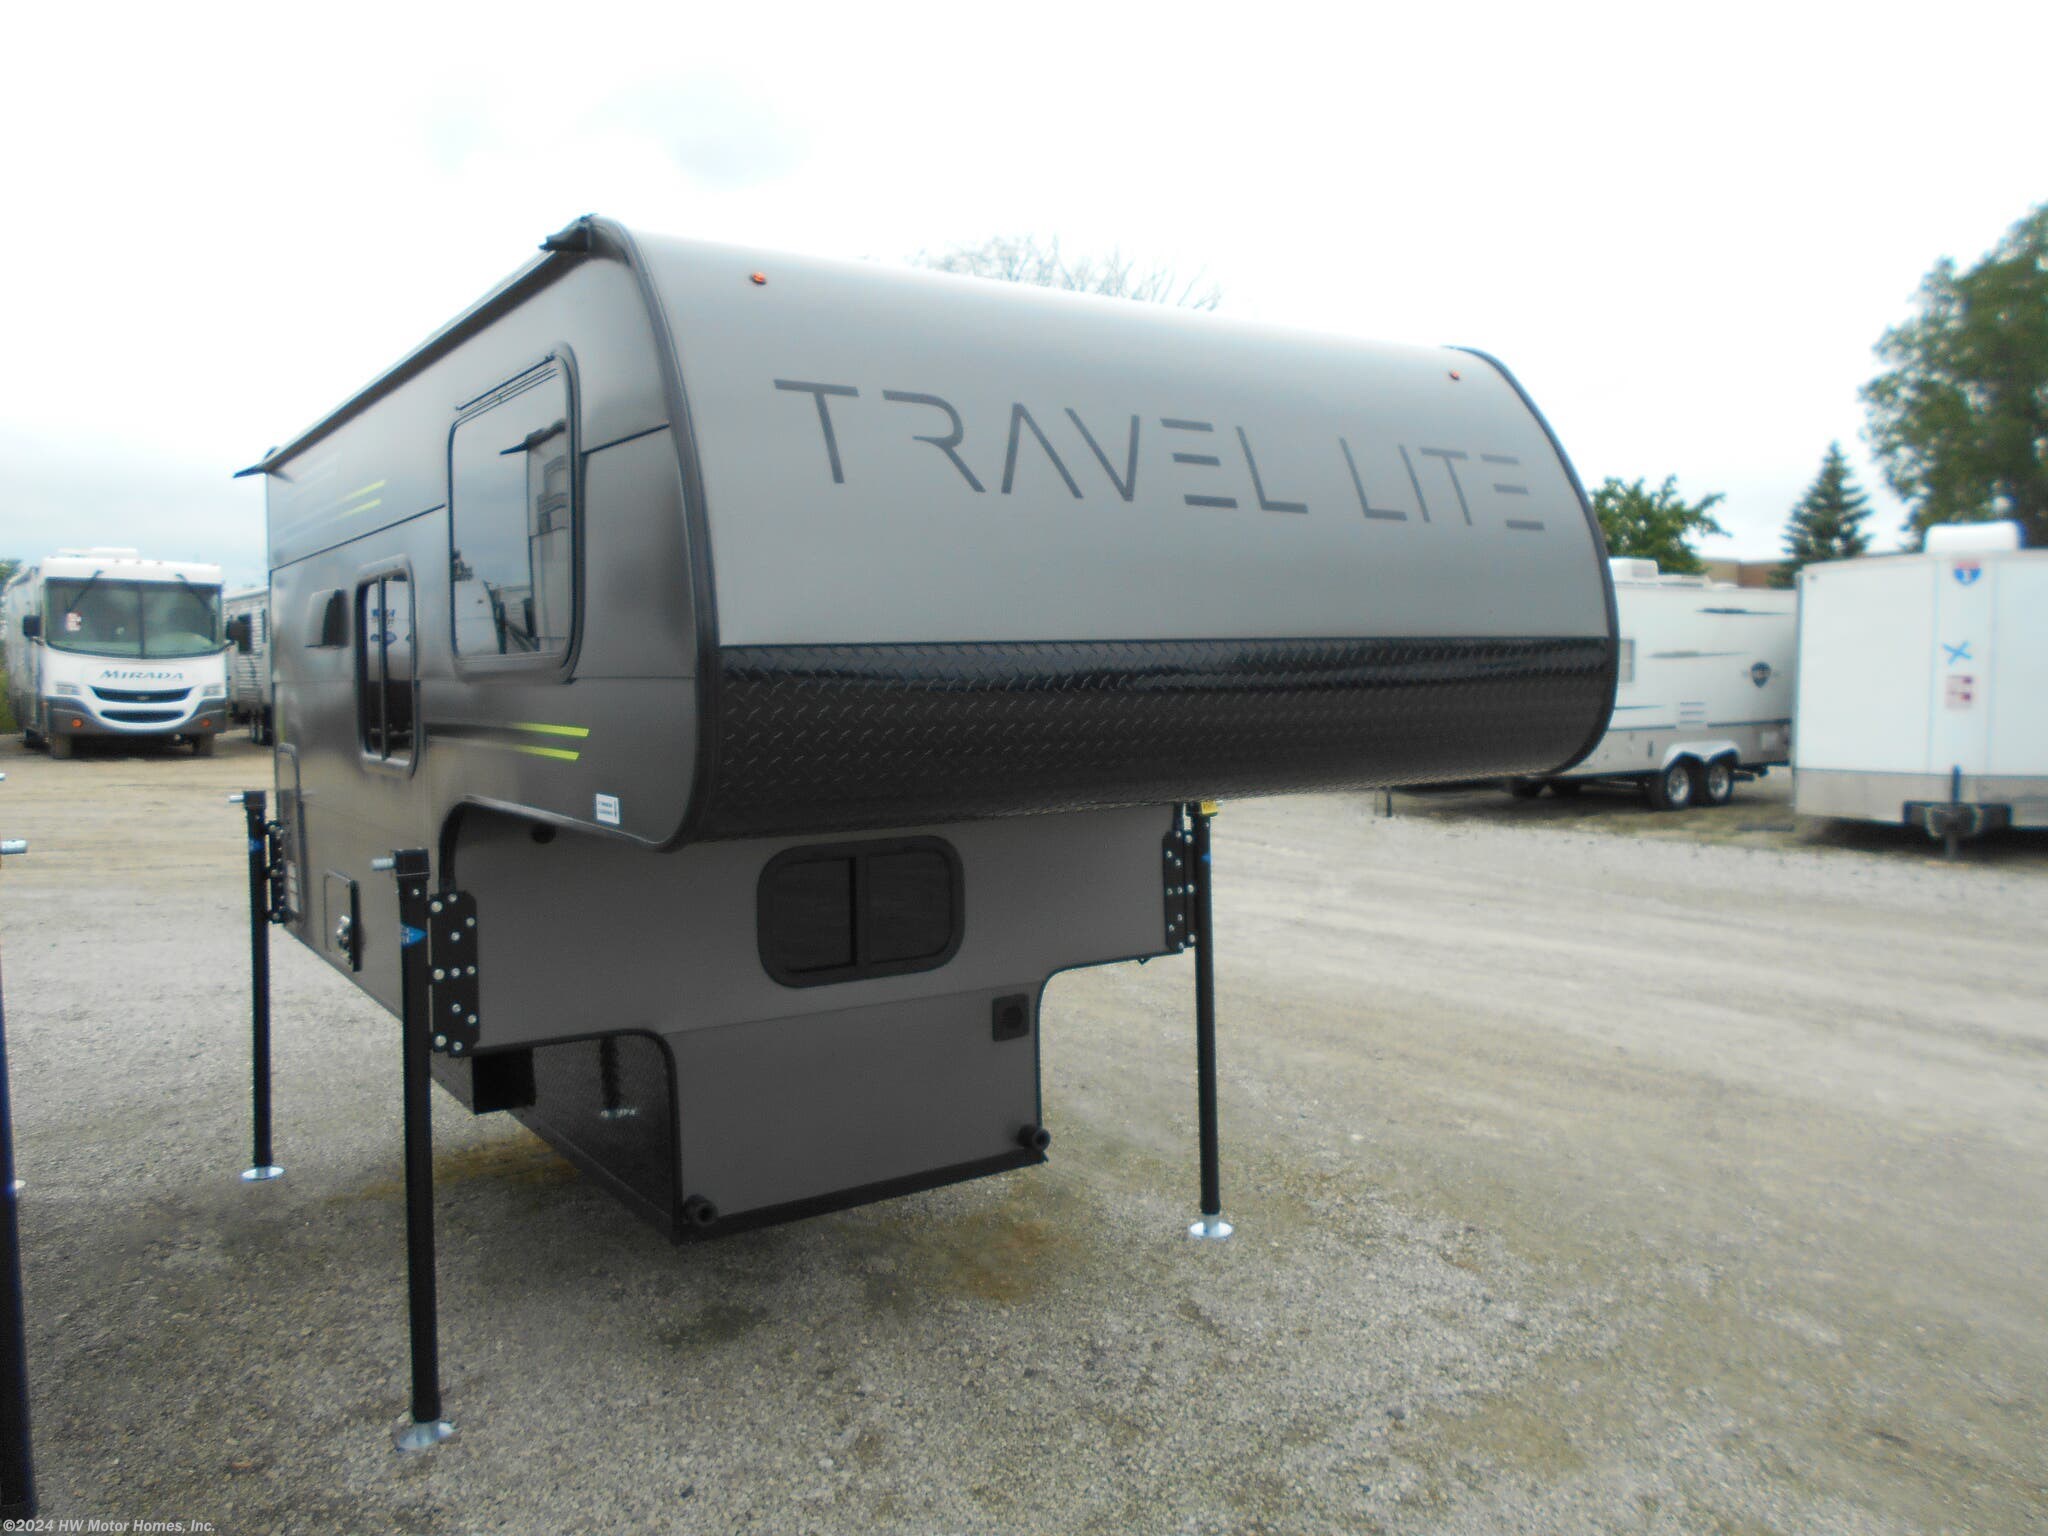 travel lite 610r for sale